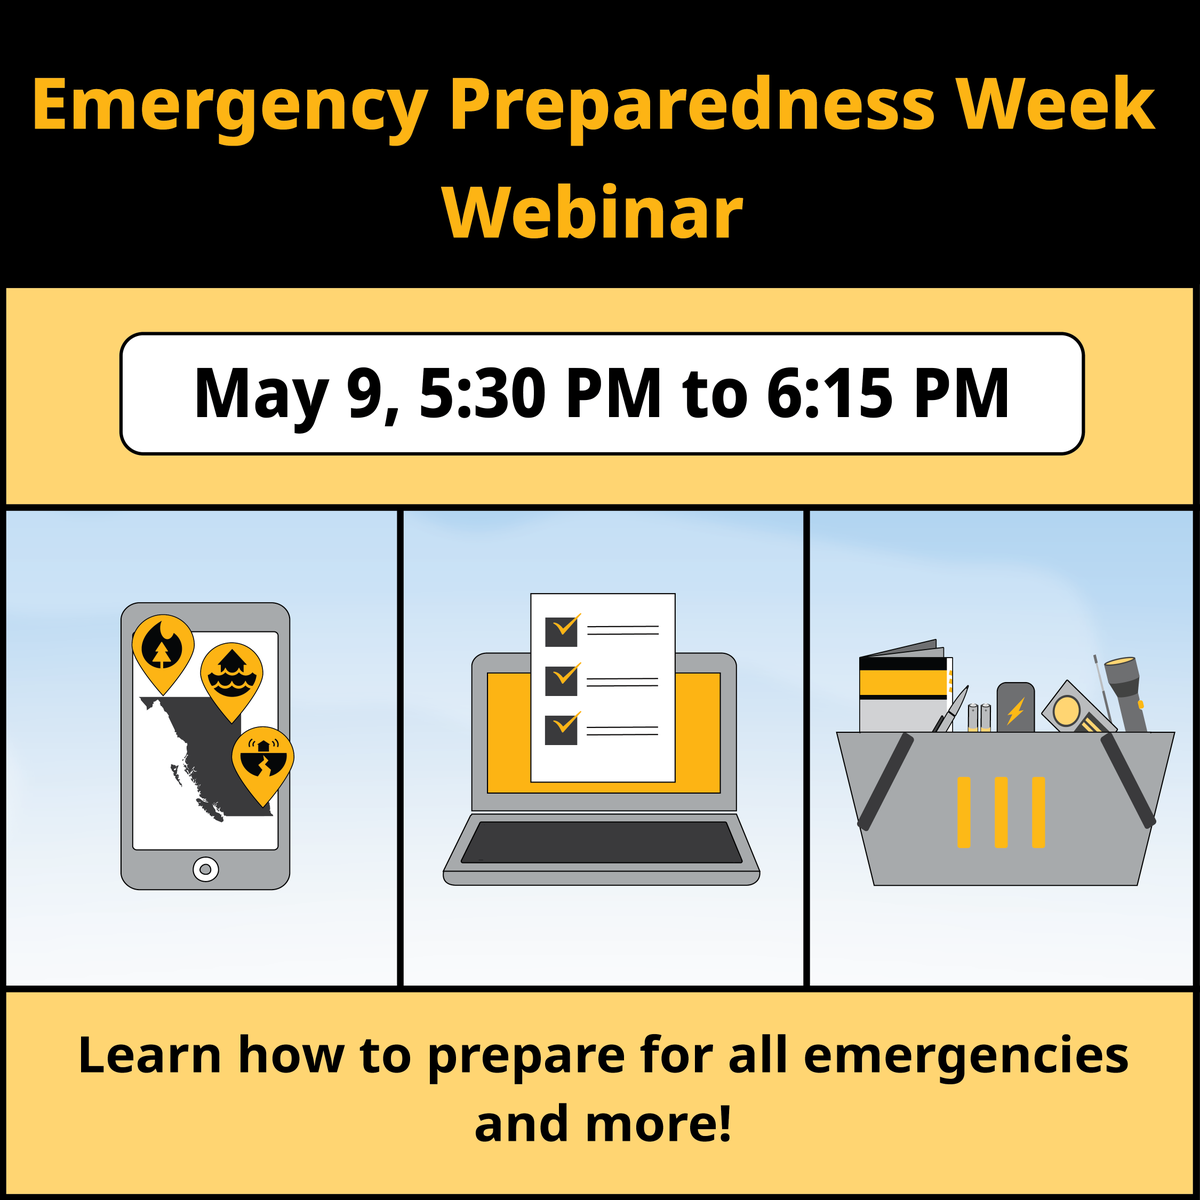 Join our upcoming 45-minute webinar to learn: How to prepare for emergencies ✔️ Fun preparedness tech tips ✔️ All participants will be entered to win a 4-person emergency kit! WHEN: Thursday, May 9, 2024 at 5:30PM (PDT) Register here: ow.ly/2yN250Rr3e